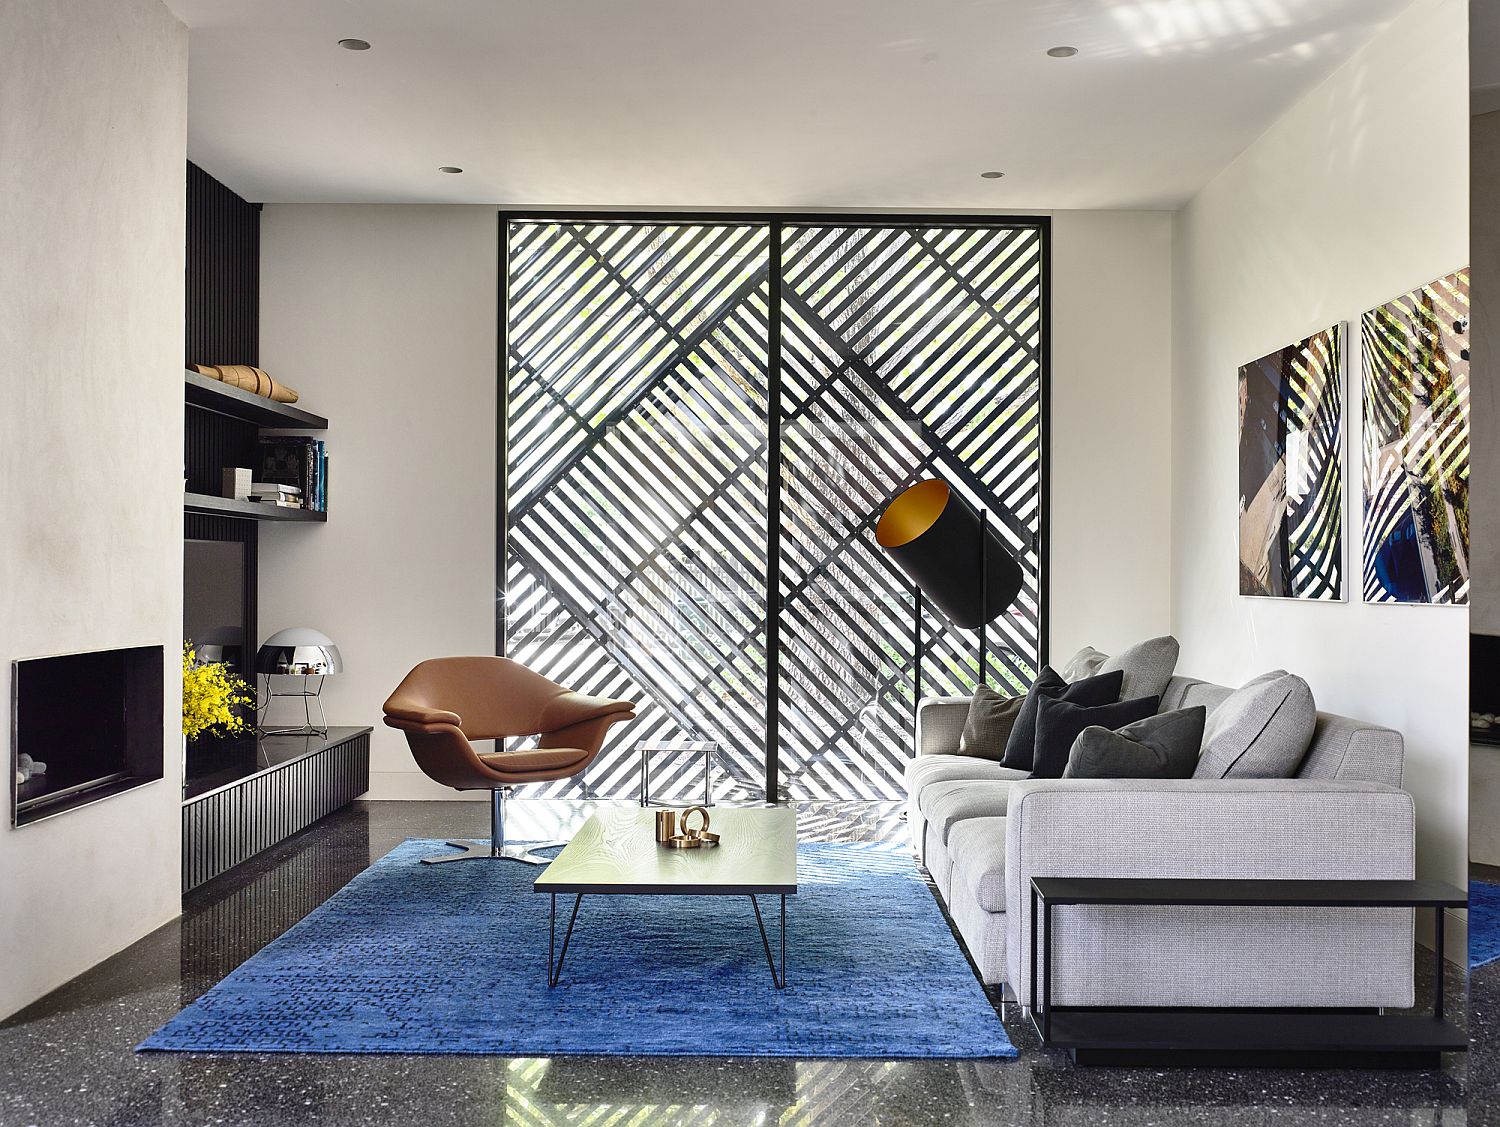 Small and stylish living area in white and black with rug adding a dash of blue